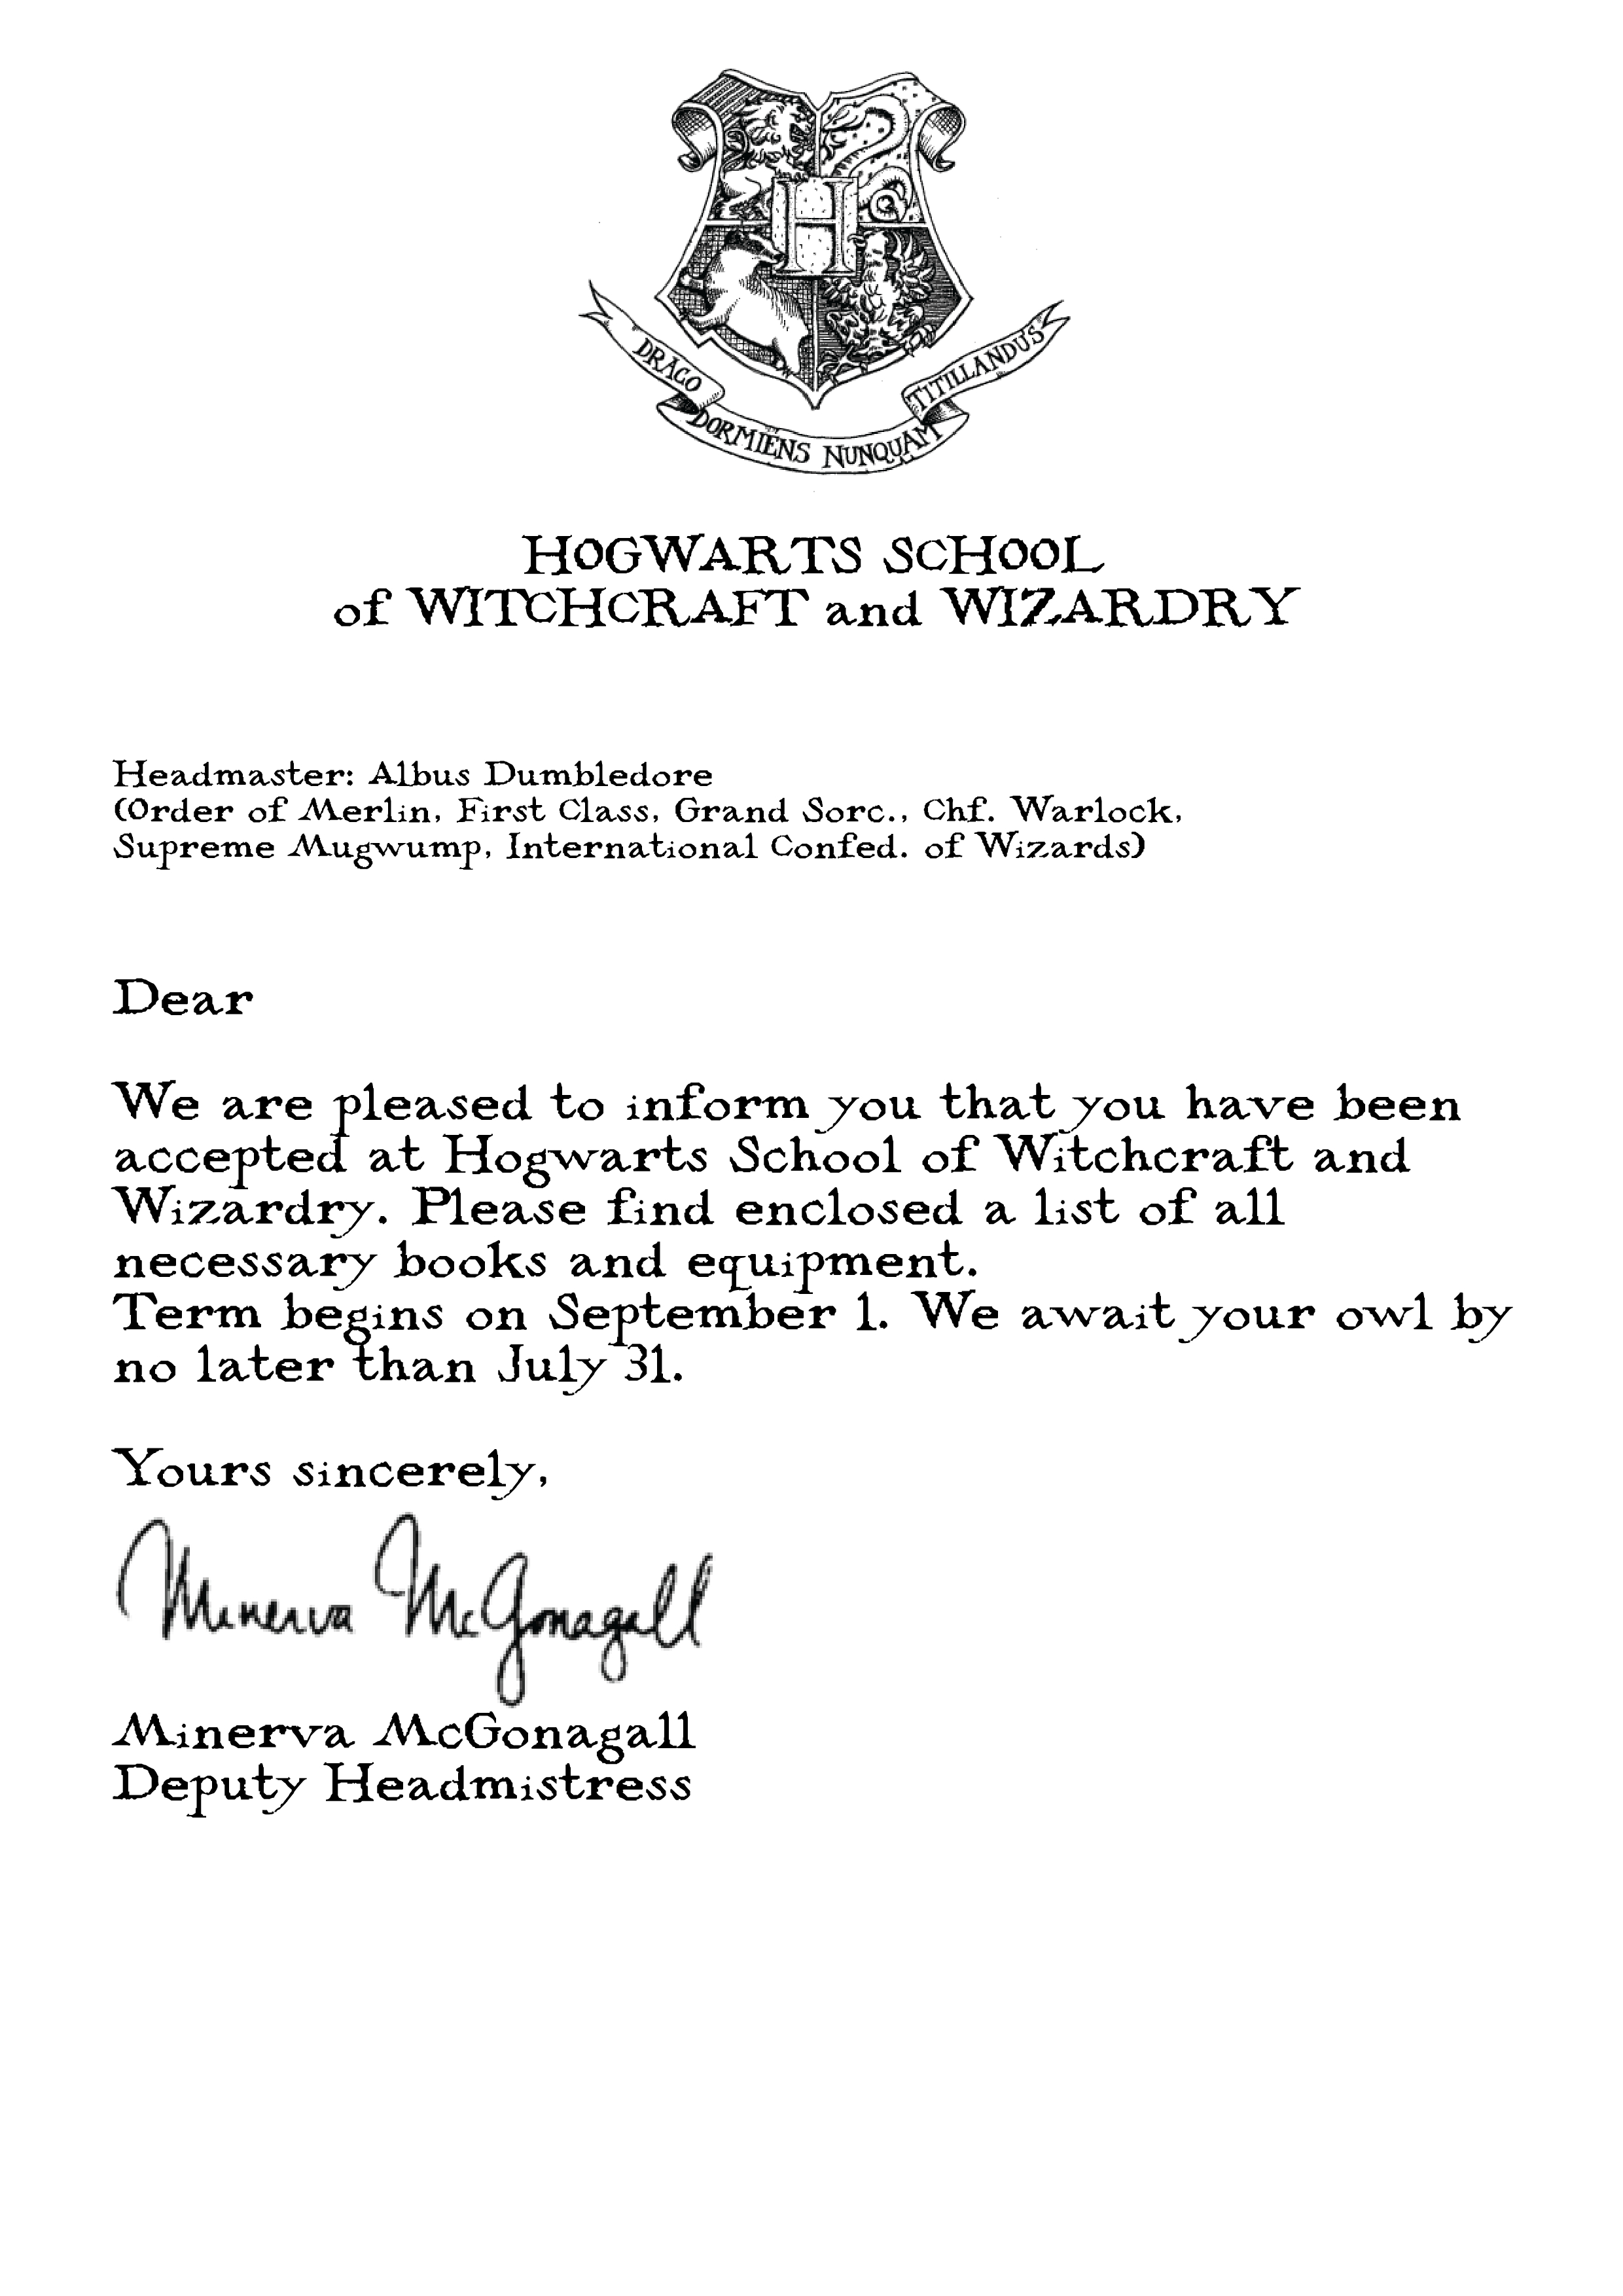 hogwarts acceptance letter template Collection-Harry Potter Hogwarts acceptance letter Imgur I wish 19-o